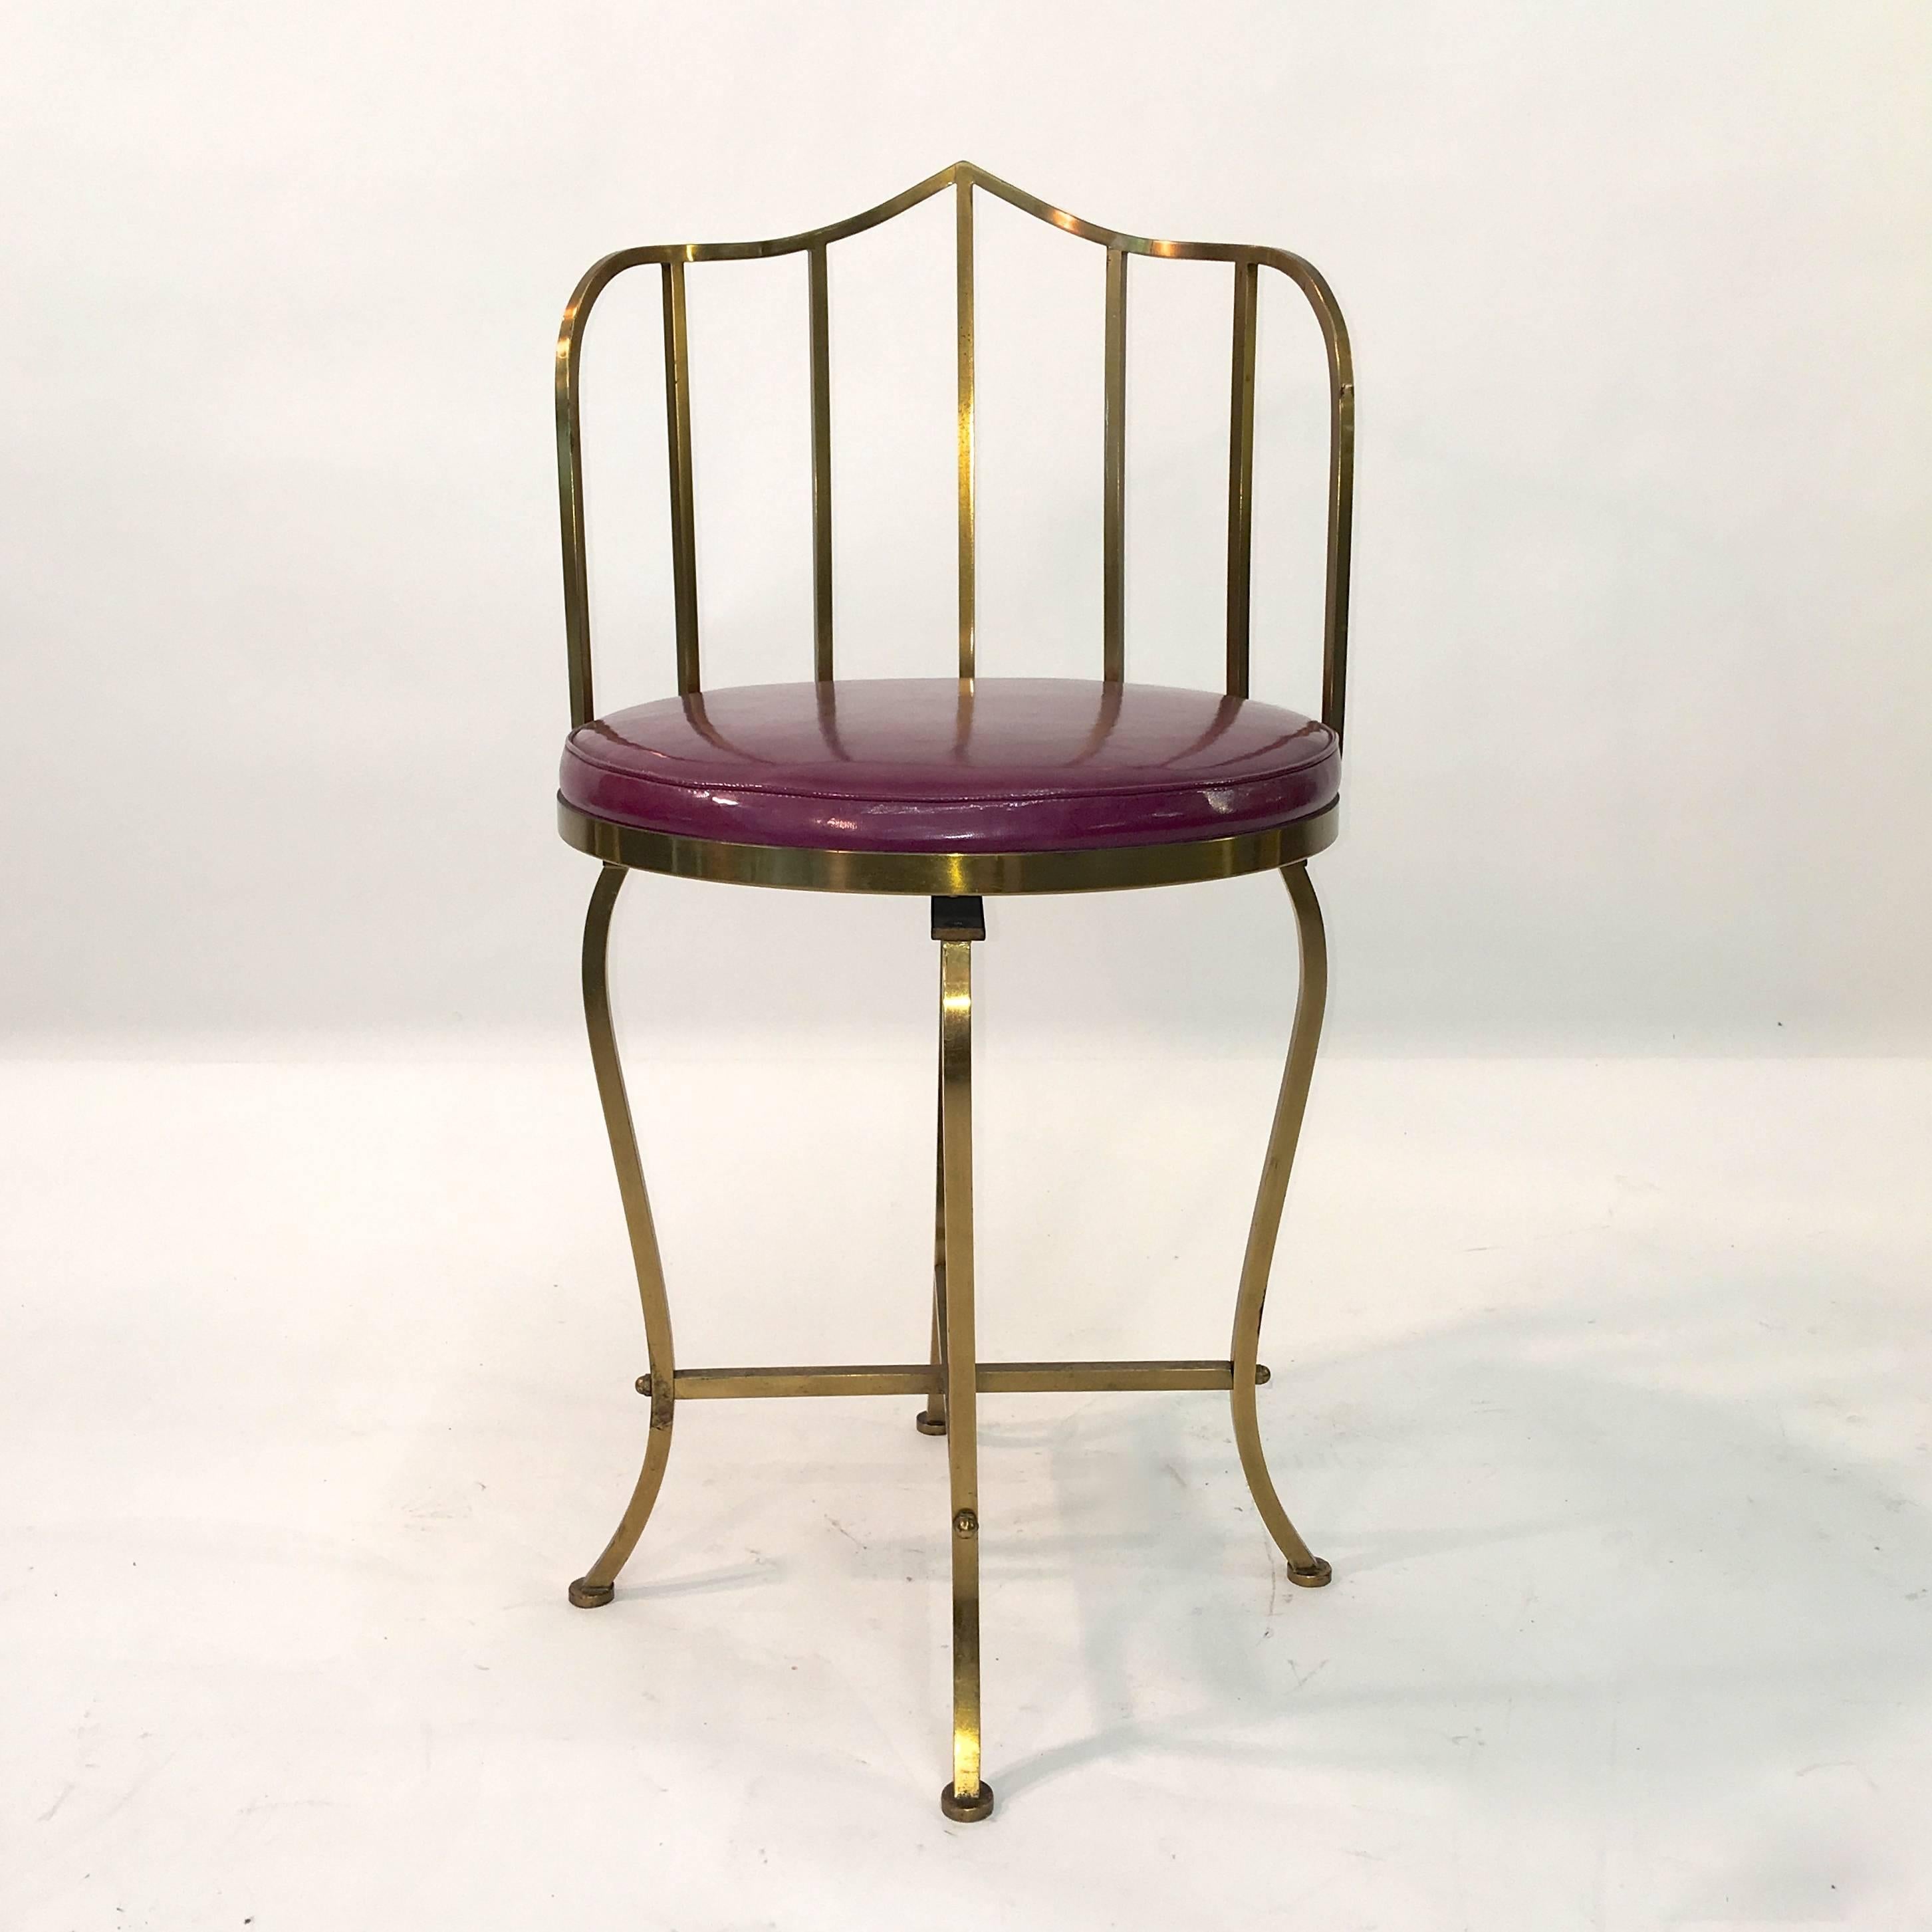 Handcrafted solid brass Hollywood Regency swivel vanity chair with round seat cushion in magenta patent leather.

The entire chair is solid brass except for the swivel mechanism itself.

Each of the legs, backrest spindles and the Ottoman-esque